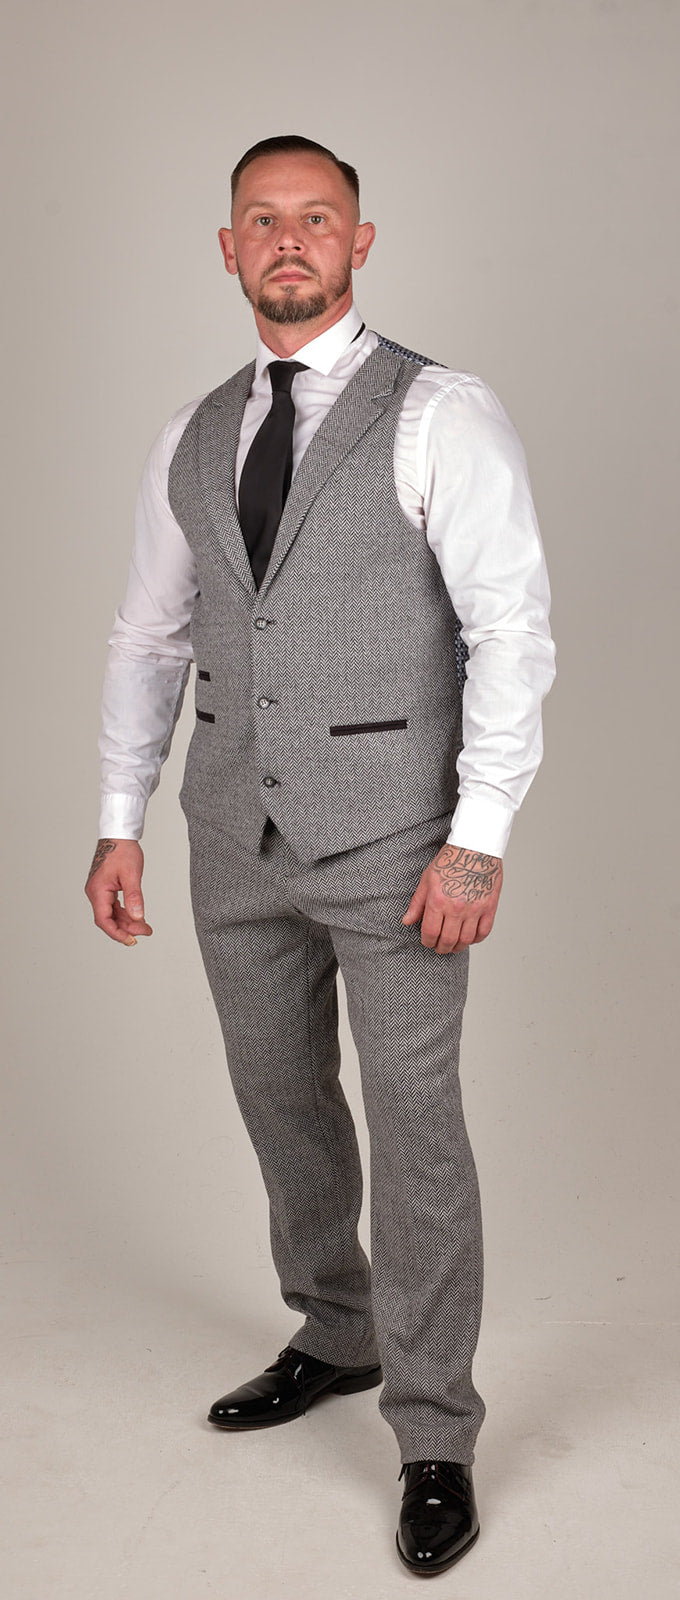 • 50% Wool Herringbone Tweed 3 Piece Suit Tailored Fit • Complete With Blazer, Waistcoat & Trousers • Super Soft Premium Herringbone Tweed Wool Blend Fabric With Contrasting Blue Navy Detailing • Perfect For Any Smart Formal Traditional Vintage Retro Themed Occasions, Such As Weddings, Proms Or Parties! - Party Wear | Office Wear